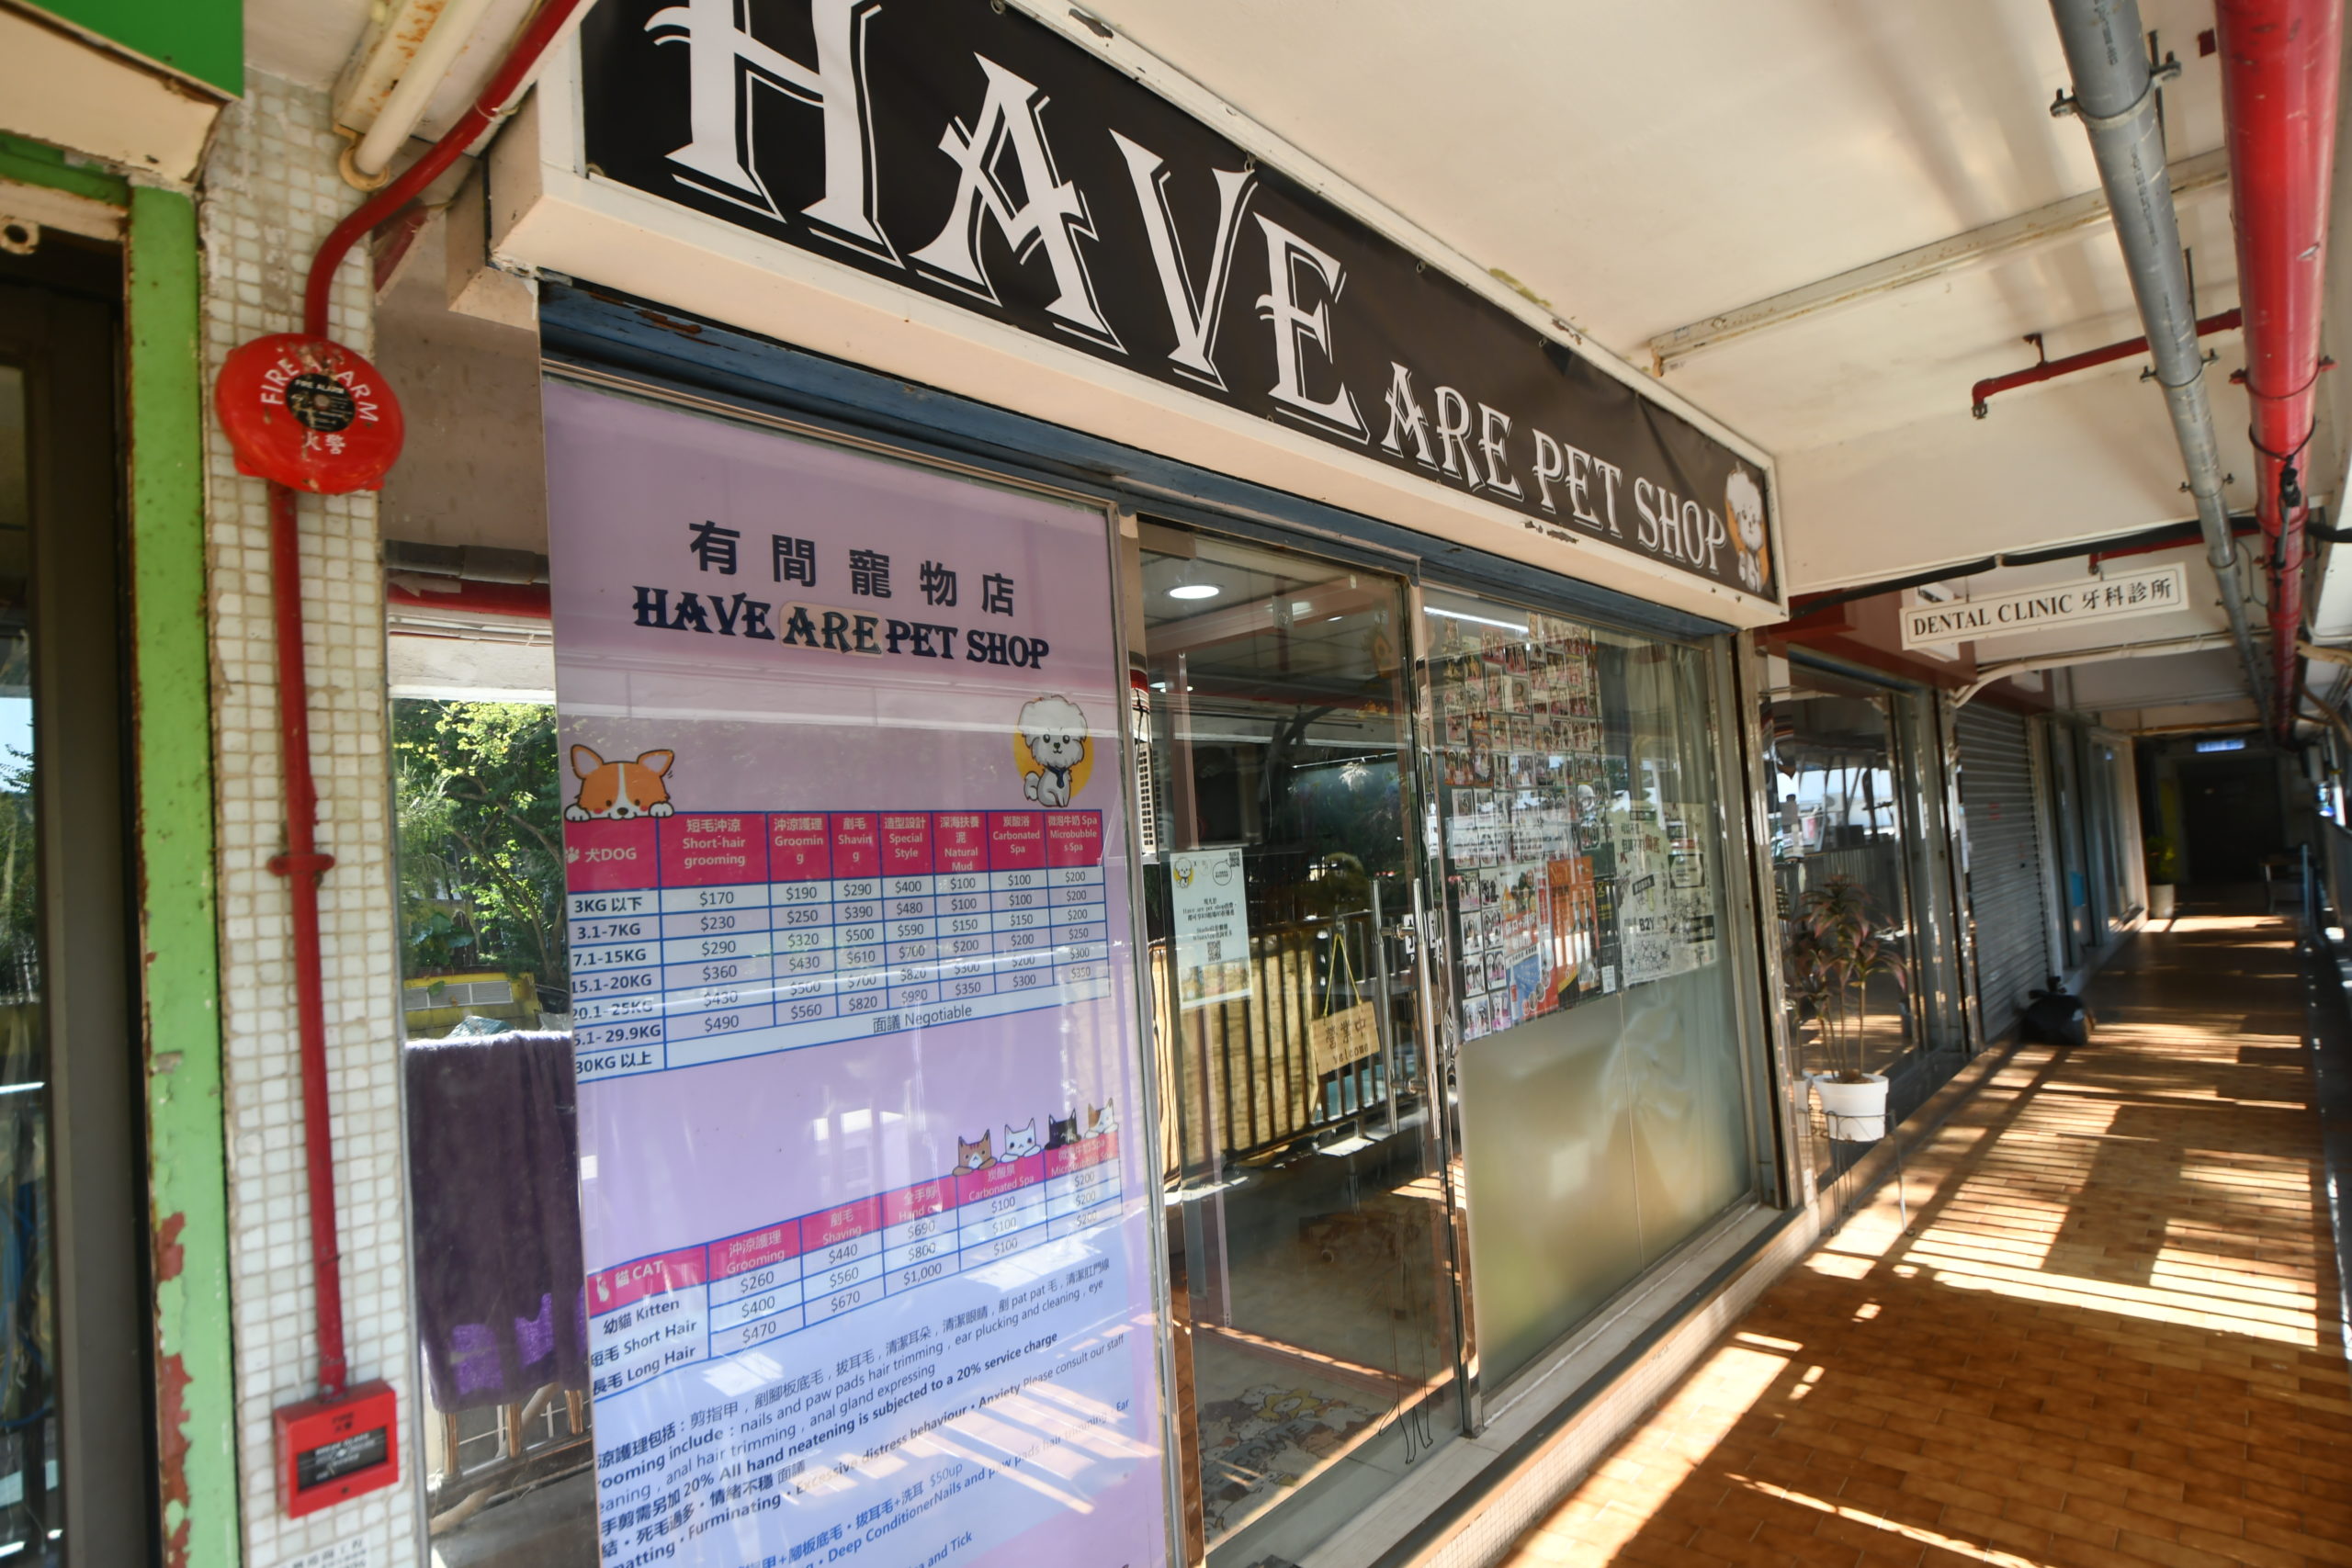 Have are pet shop 有間寵物店